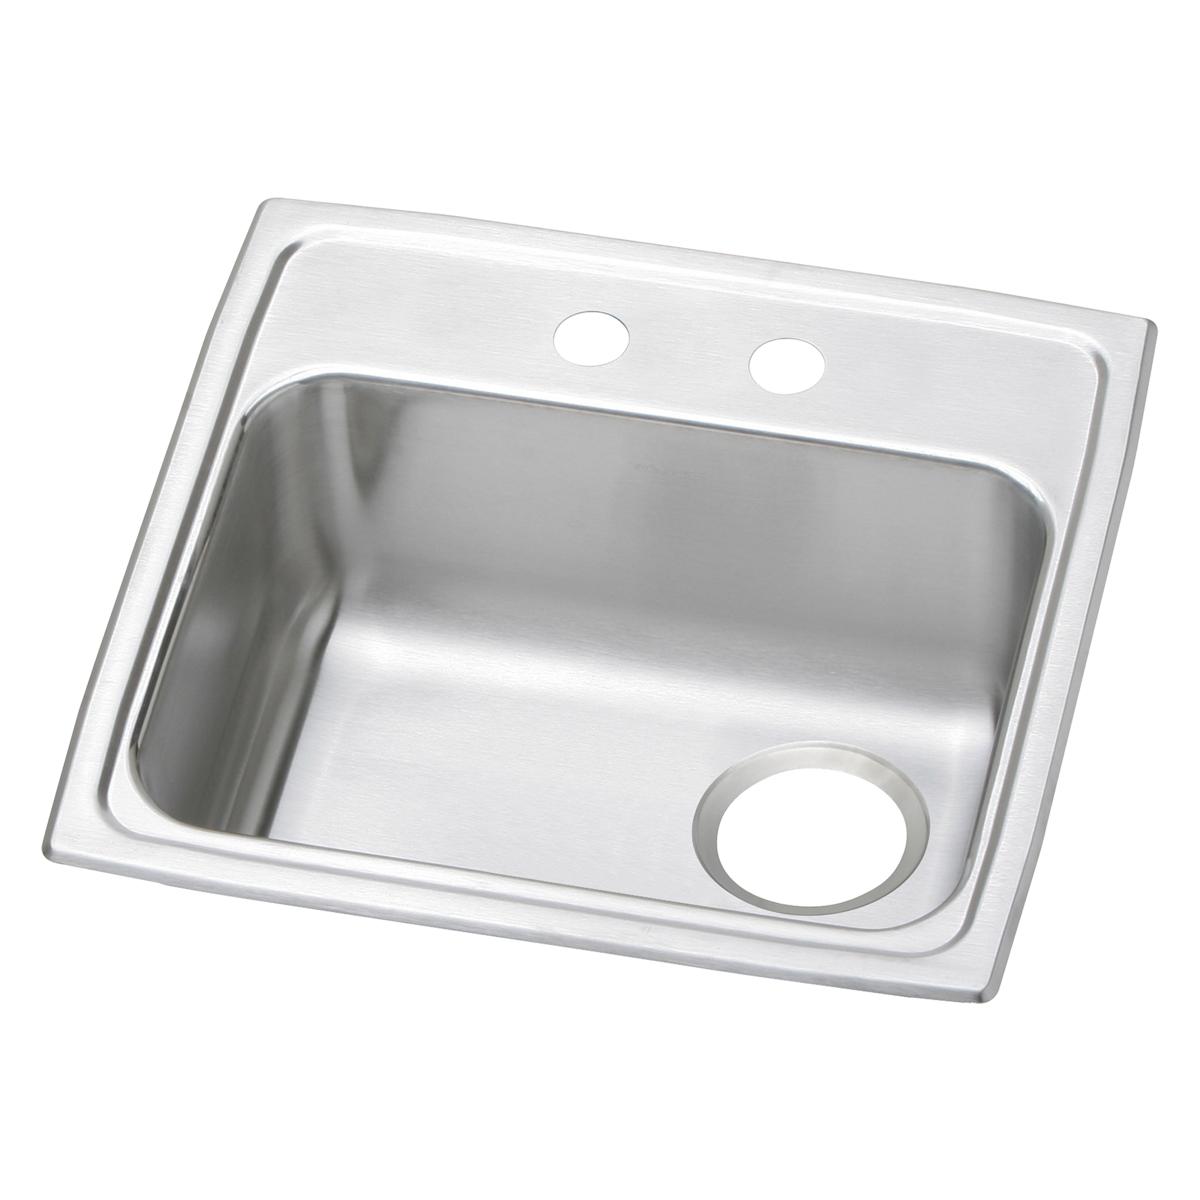 Elkay Celebrity 19-1/2" x 19" x 5-1/2" Single Bowl Drop-in ADA Sink with Quick-clip and Right Drain